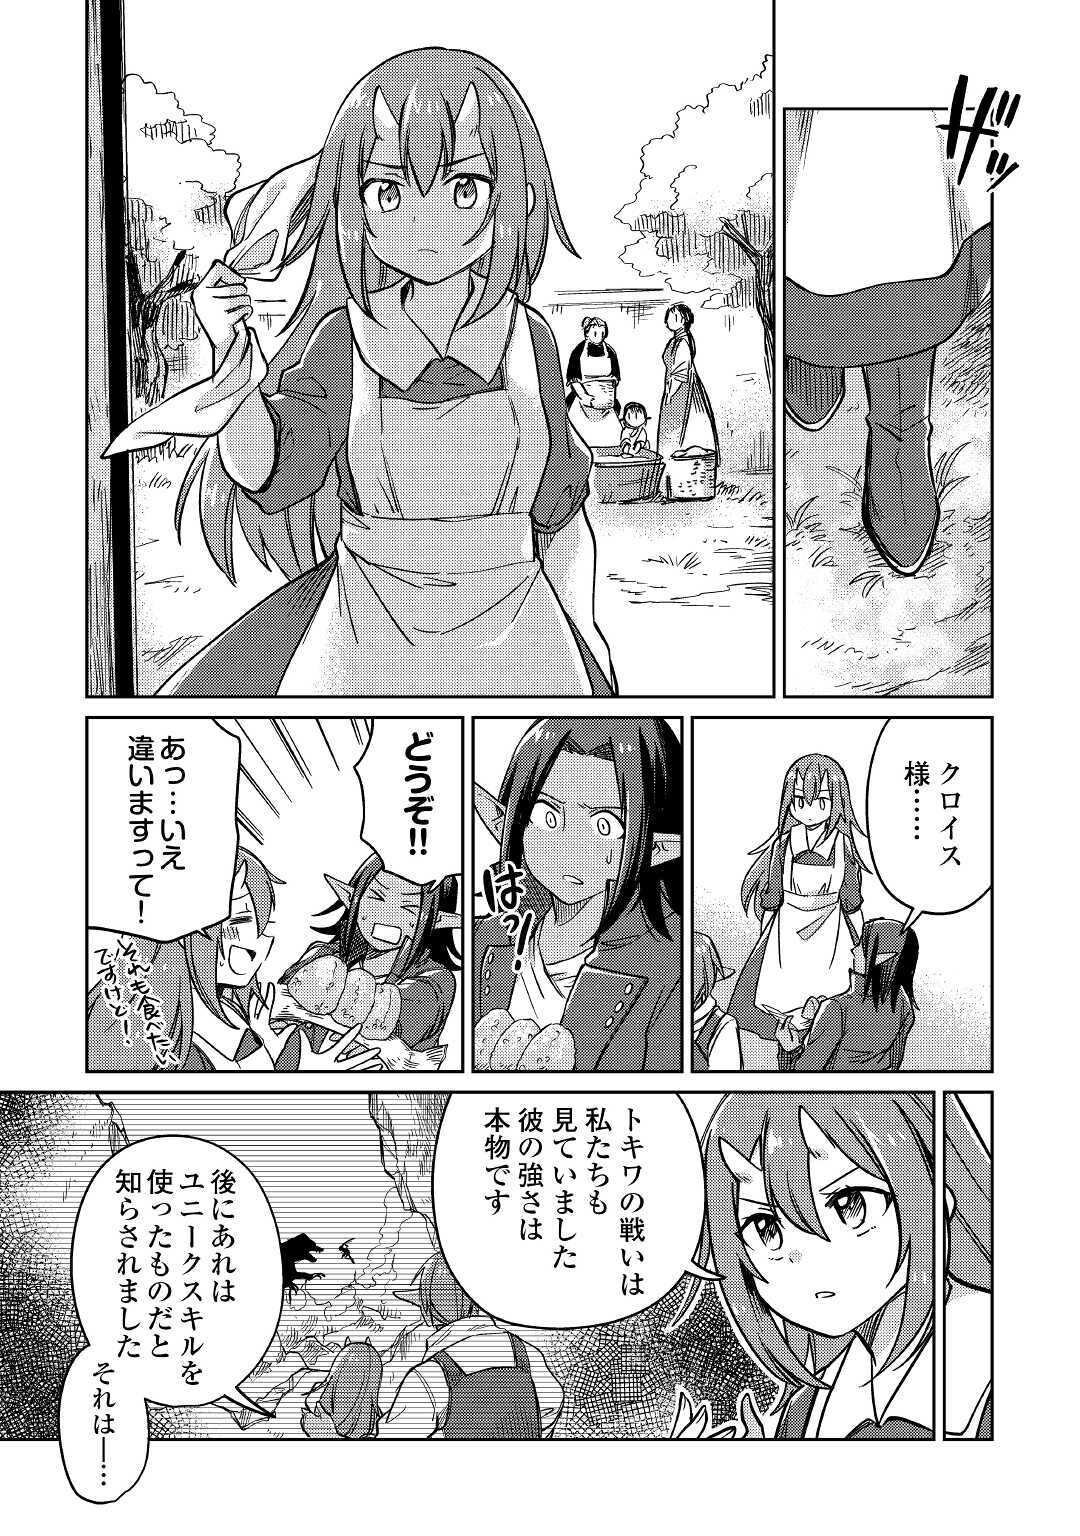 The Former Structural Researcher’s Story of Otherworldly Adventure 第29話 - Page 7